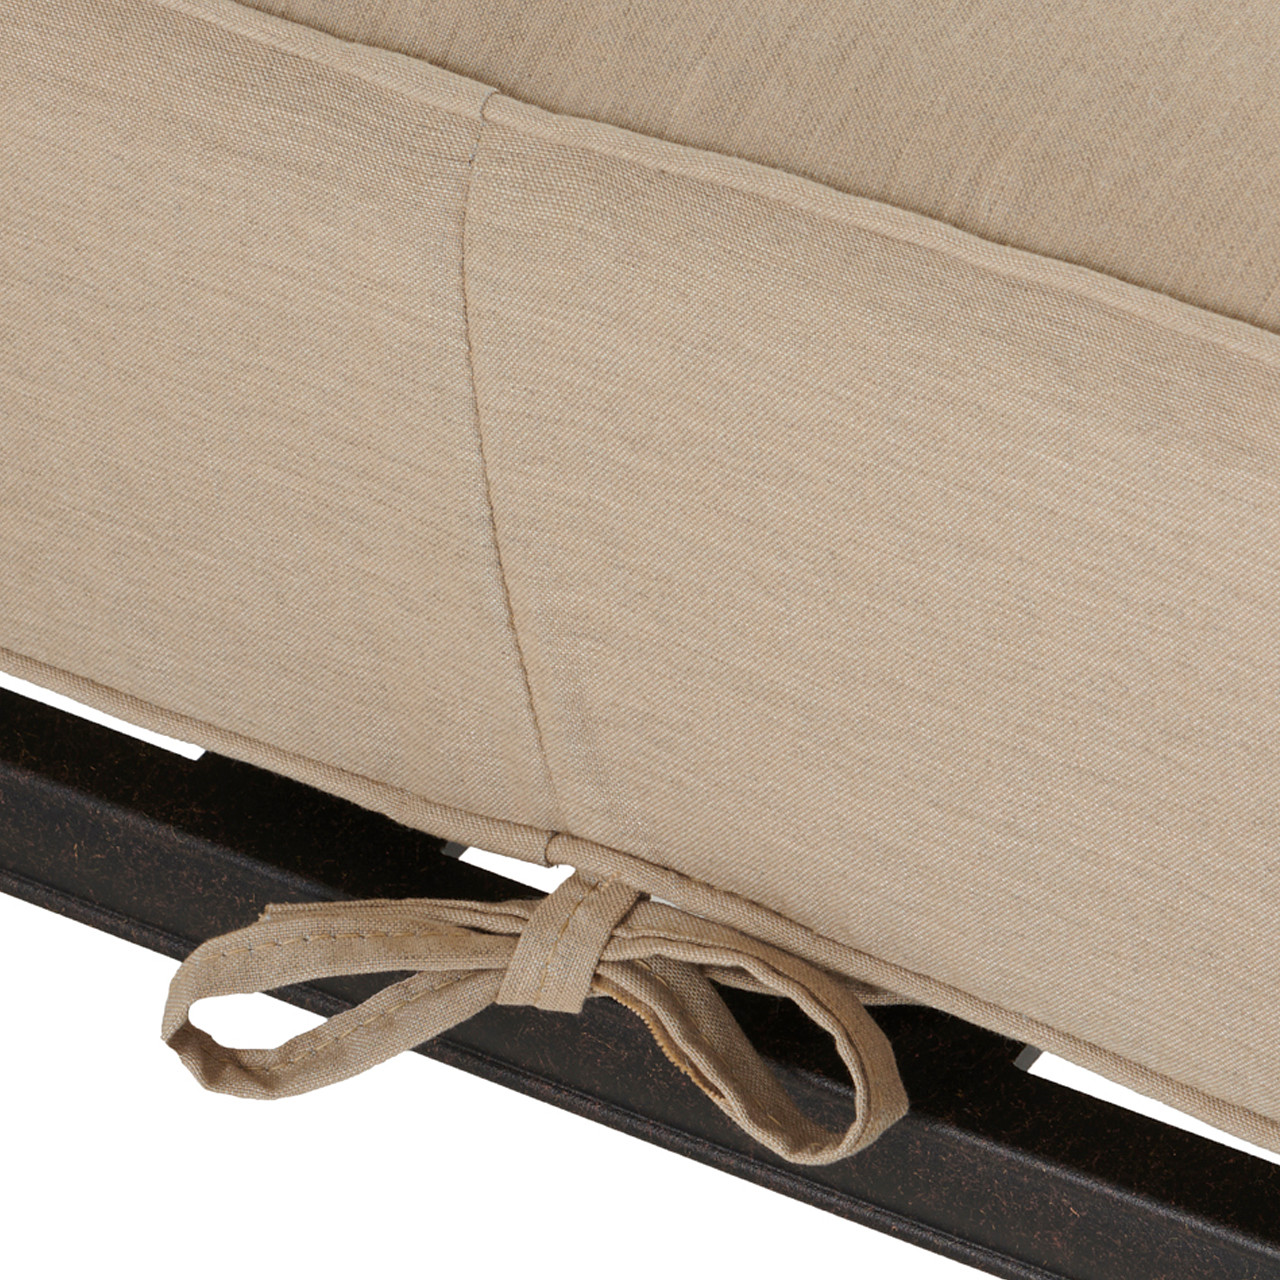 25.5 x 25.5 in. Remy Linen Outdura Self-Welt Estate Club Ottoman Cushion (Frame Sold Separately)